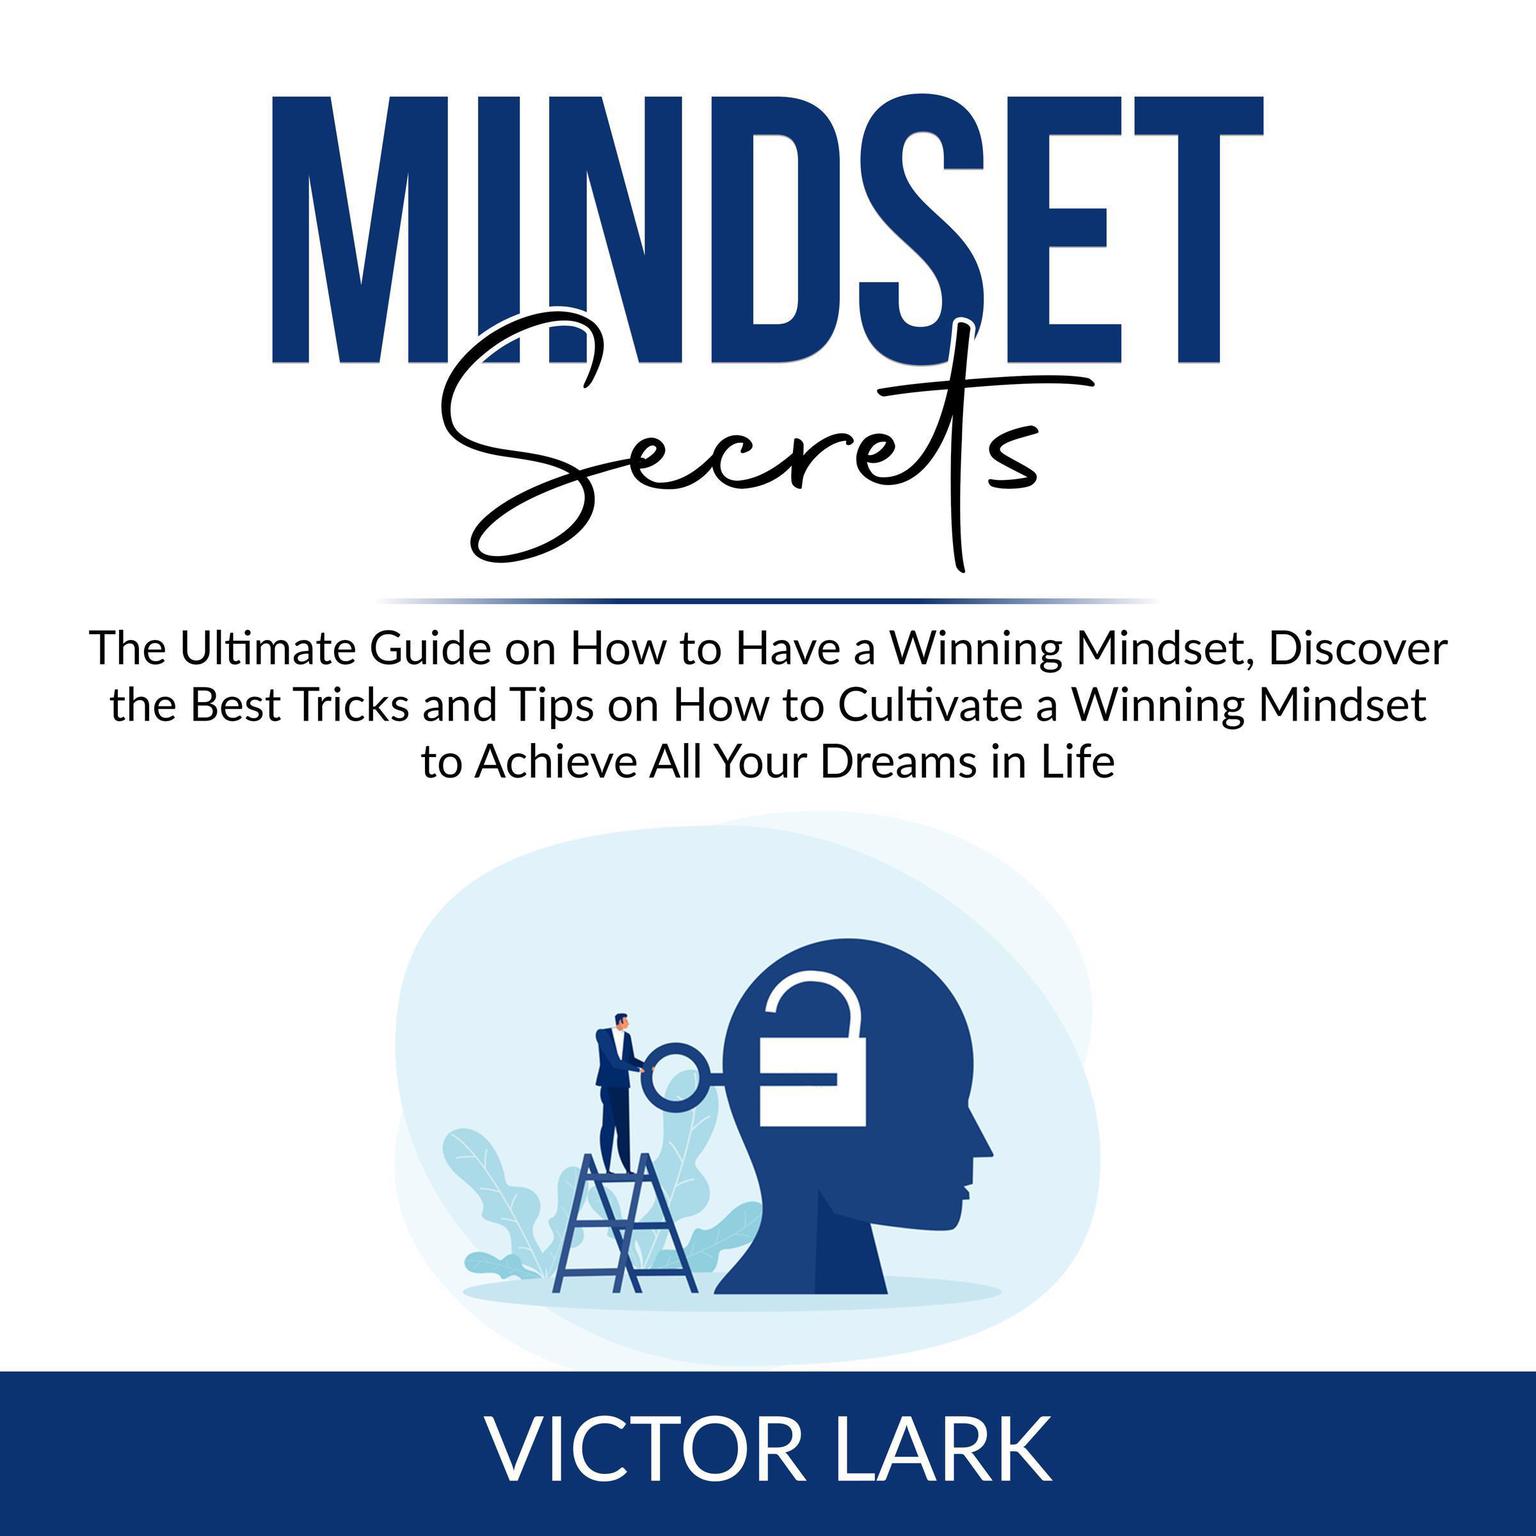 Mindset Secrets: The Ultimate Guide on How to Have a Winning Mindset, Discover the Best Tricks and Tips on How to Cultivate a Winning Mindset to Achieve All Your Dreams in LIfe Audiobook, by Victor Lark